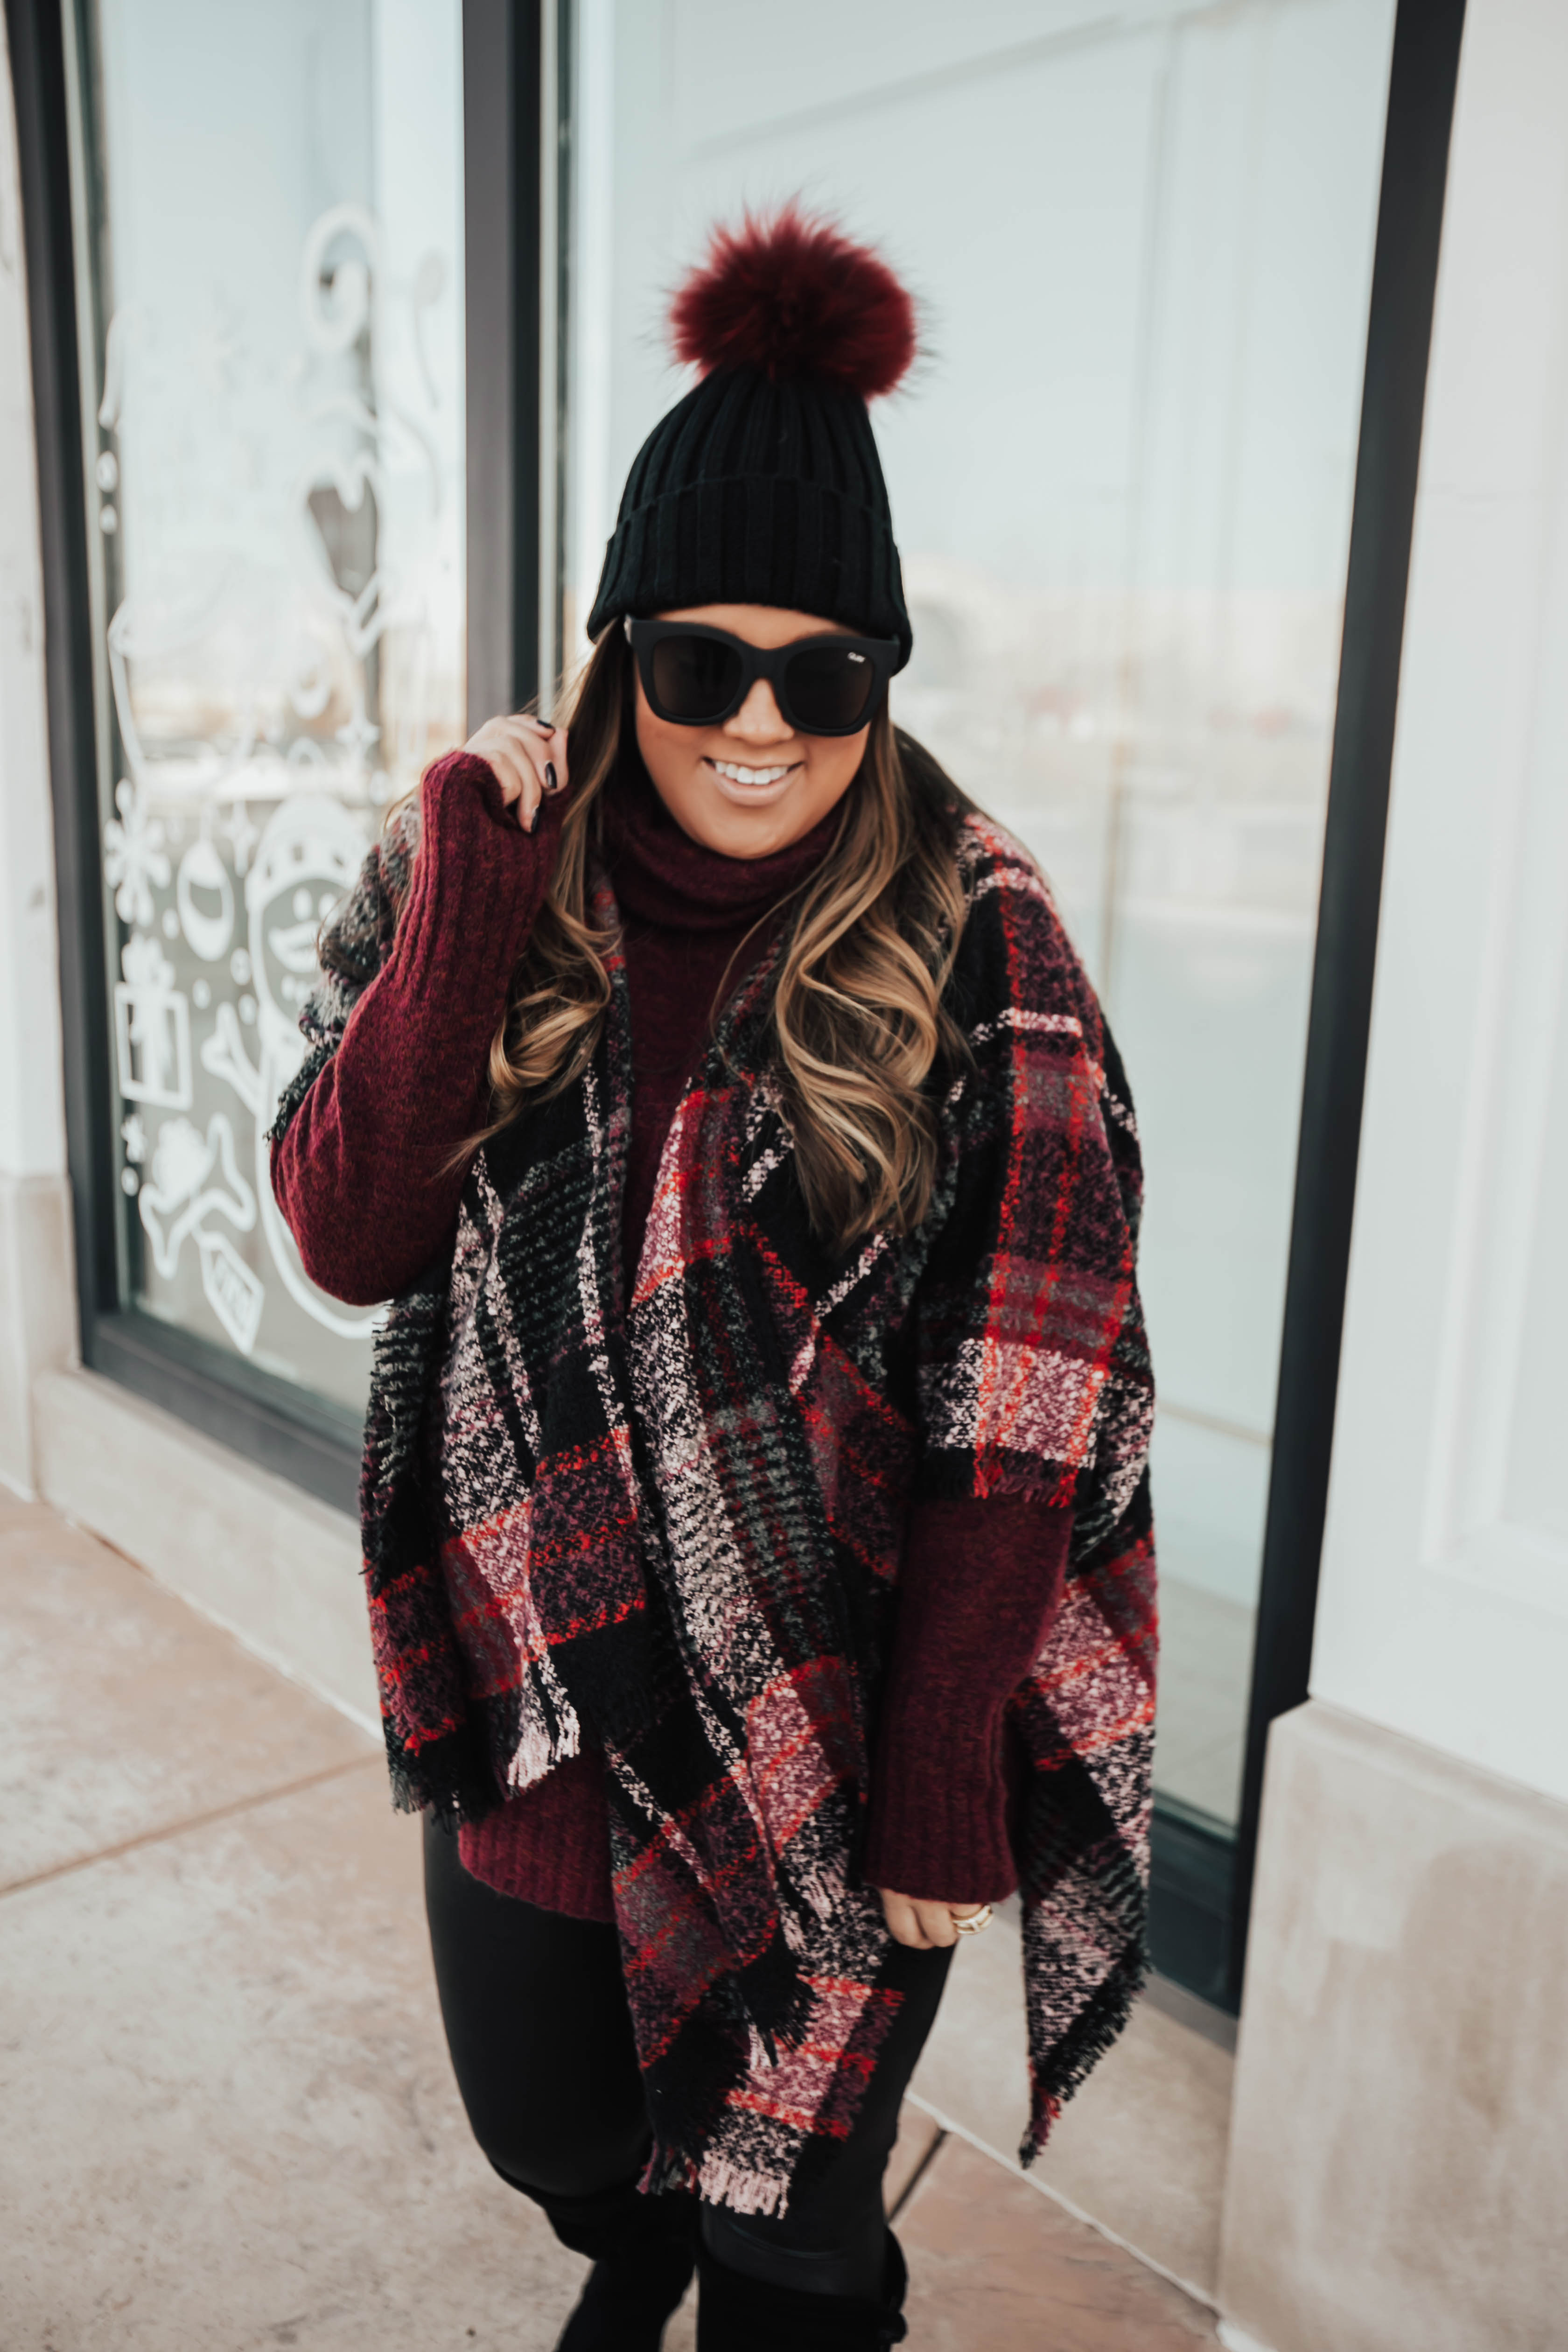 Reno blogger Ashley Zeal from Two Peas in a Prada shares her November Best Sellers. She is going over all of the best selling items that you all bought last month!